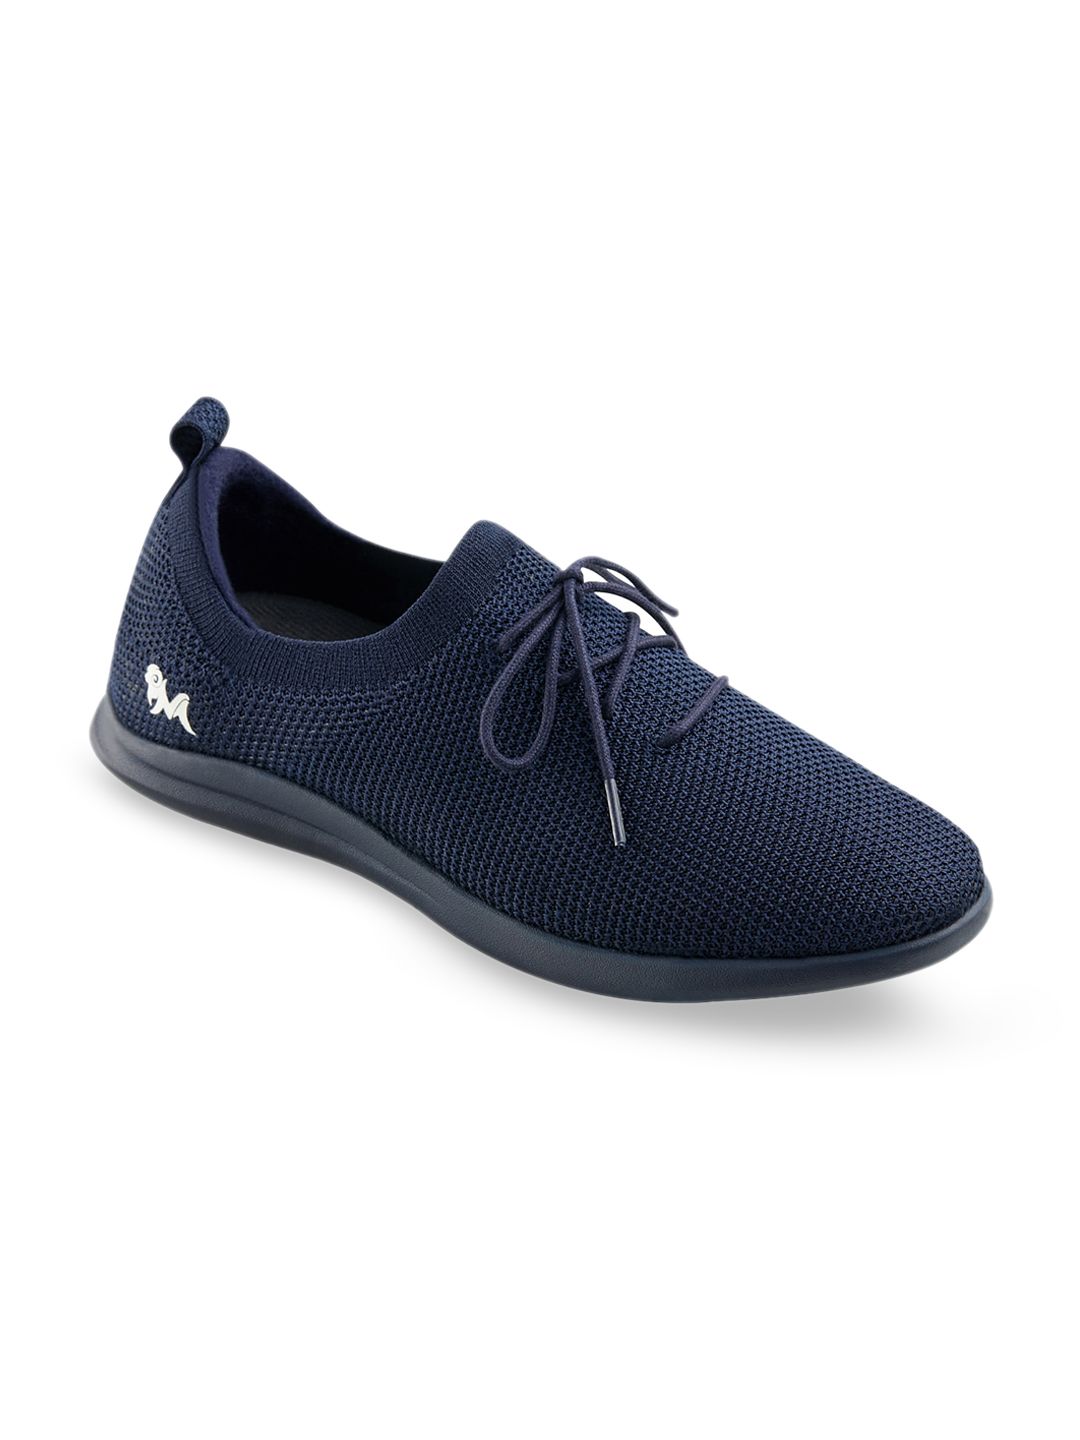 NEEMANS Unisex Navy Blue Re-Live Knit Sneakers Price in India